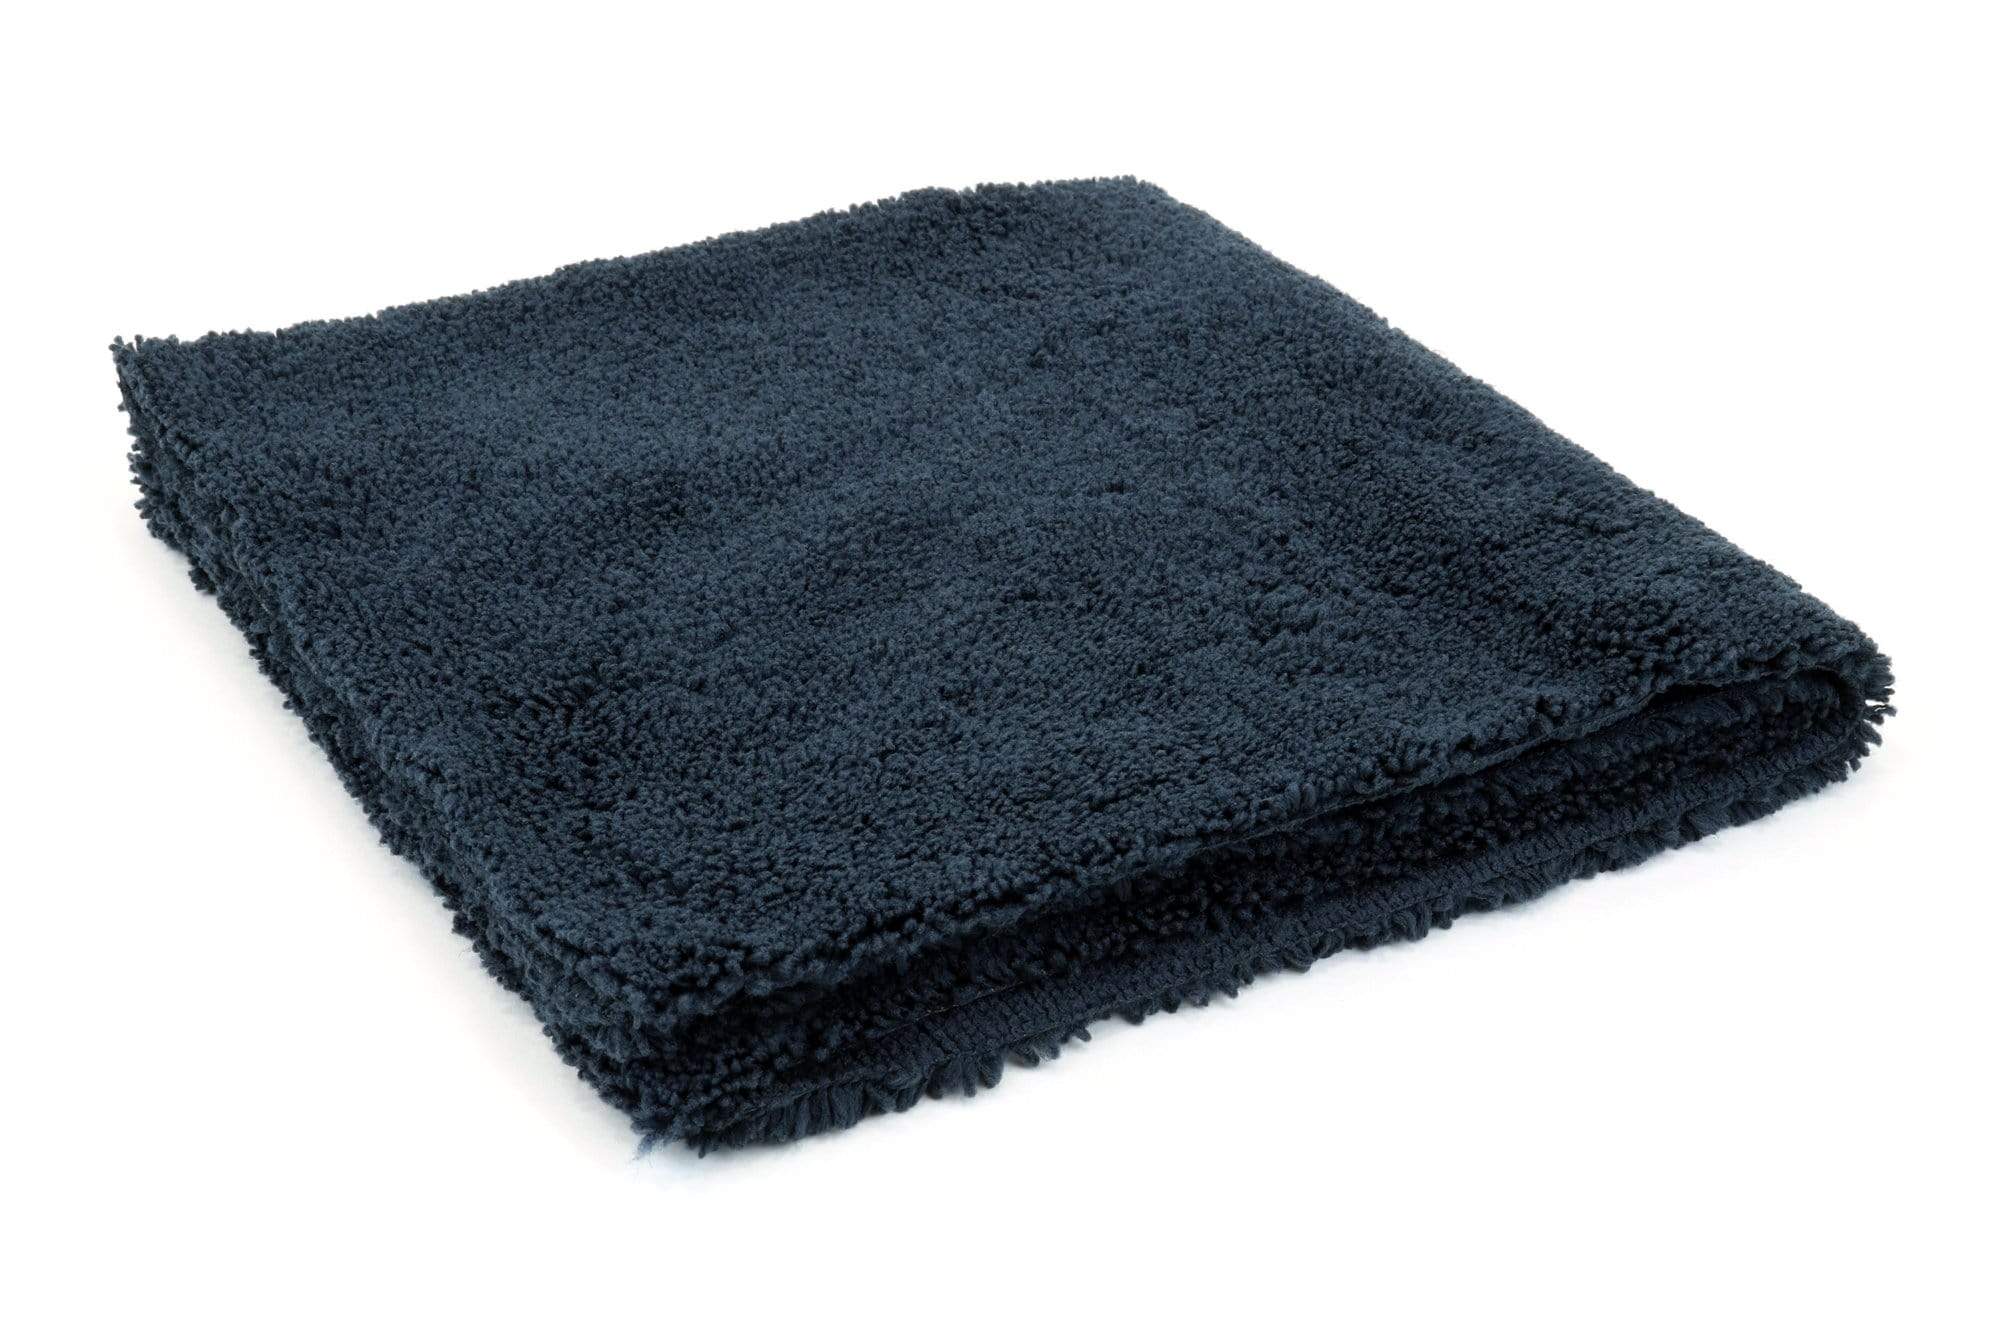 16 x 16 Economy All Purpose Microfiber Towels - 50 Pack - Reusable Wash  Cloths, Dust, Kitchen, Car, Shop Rags for Cleaning (Black)